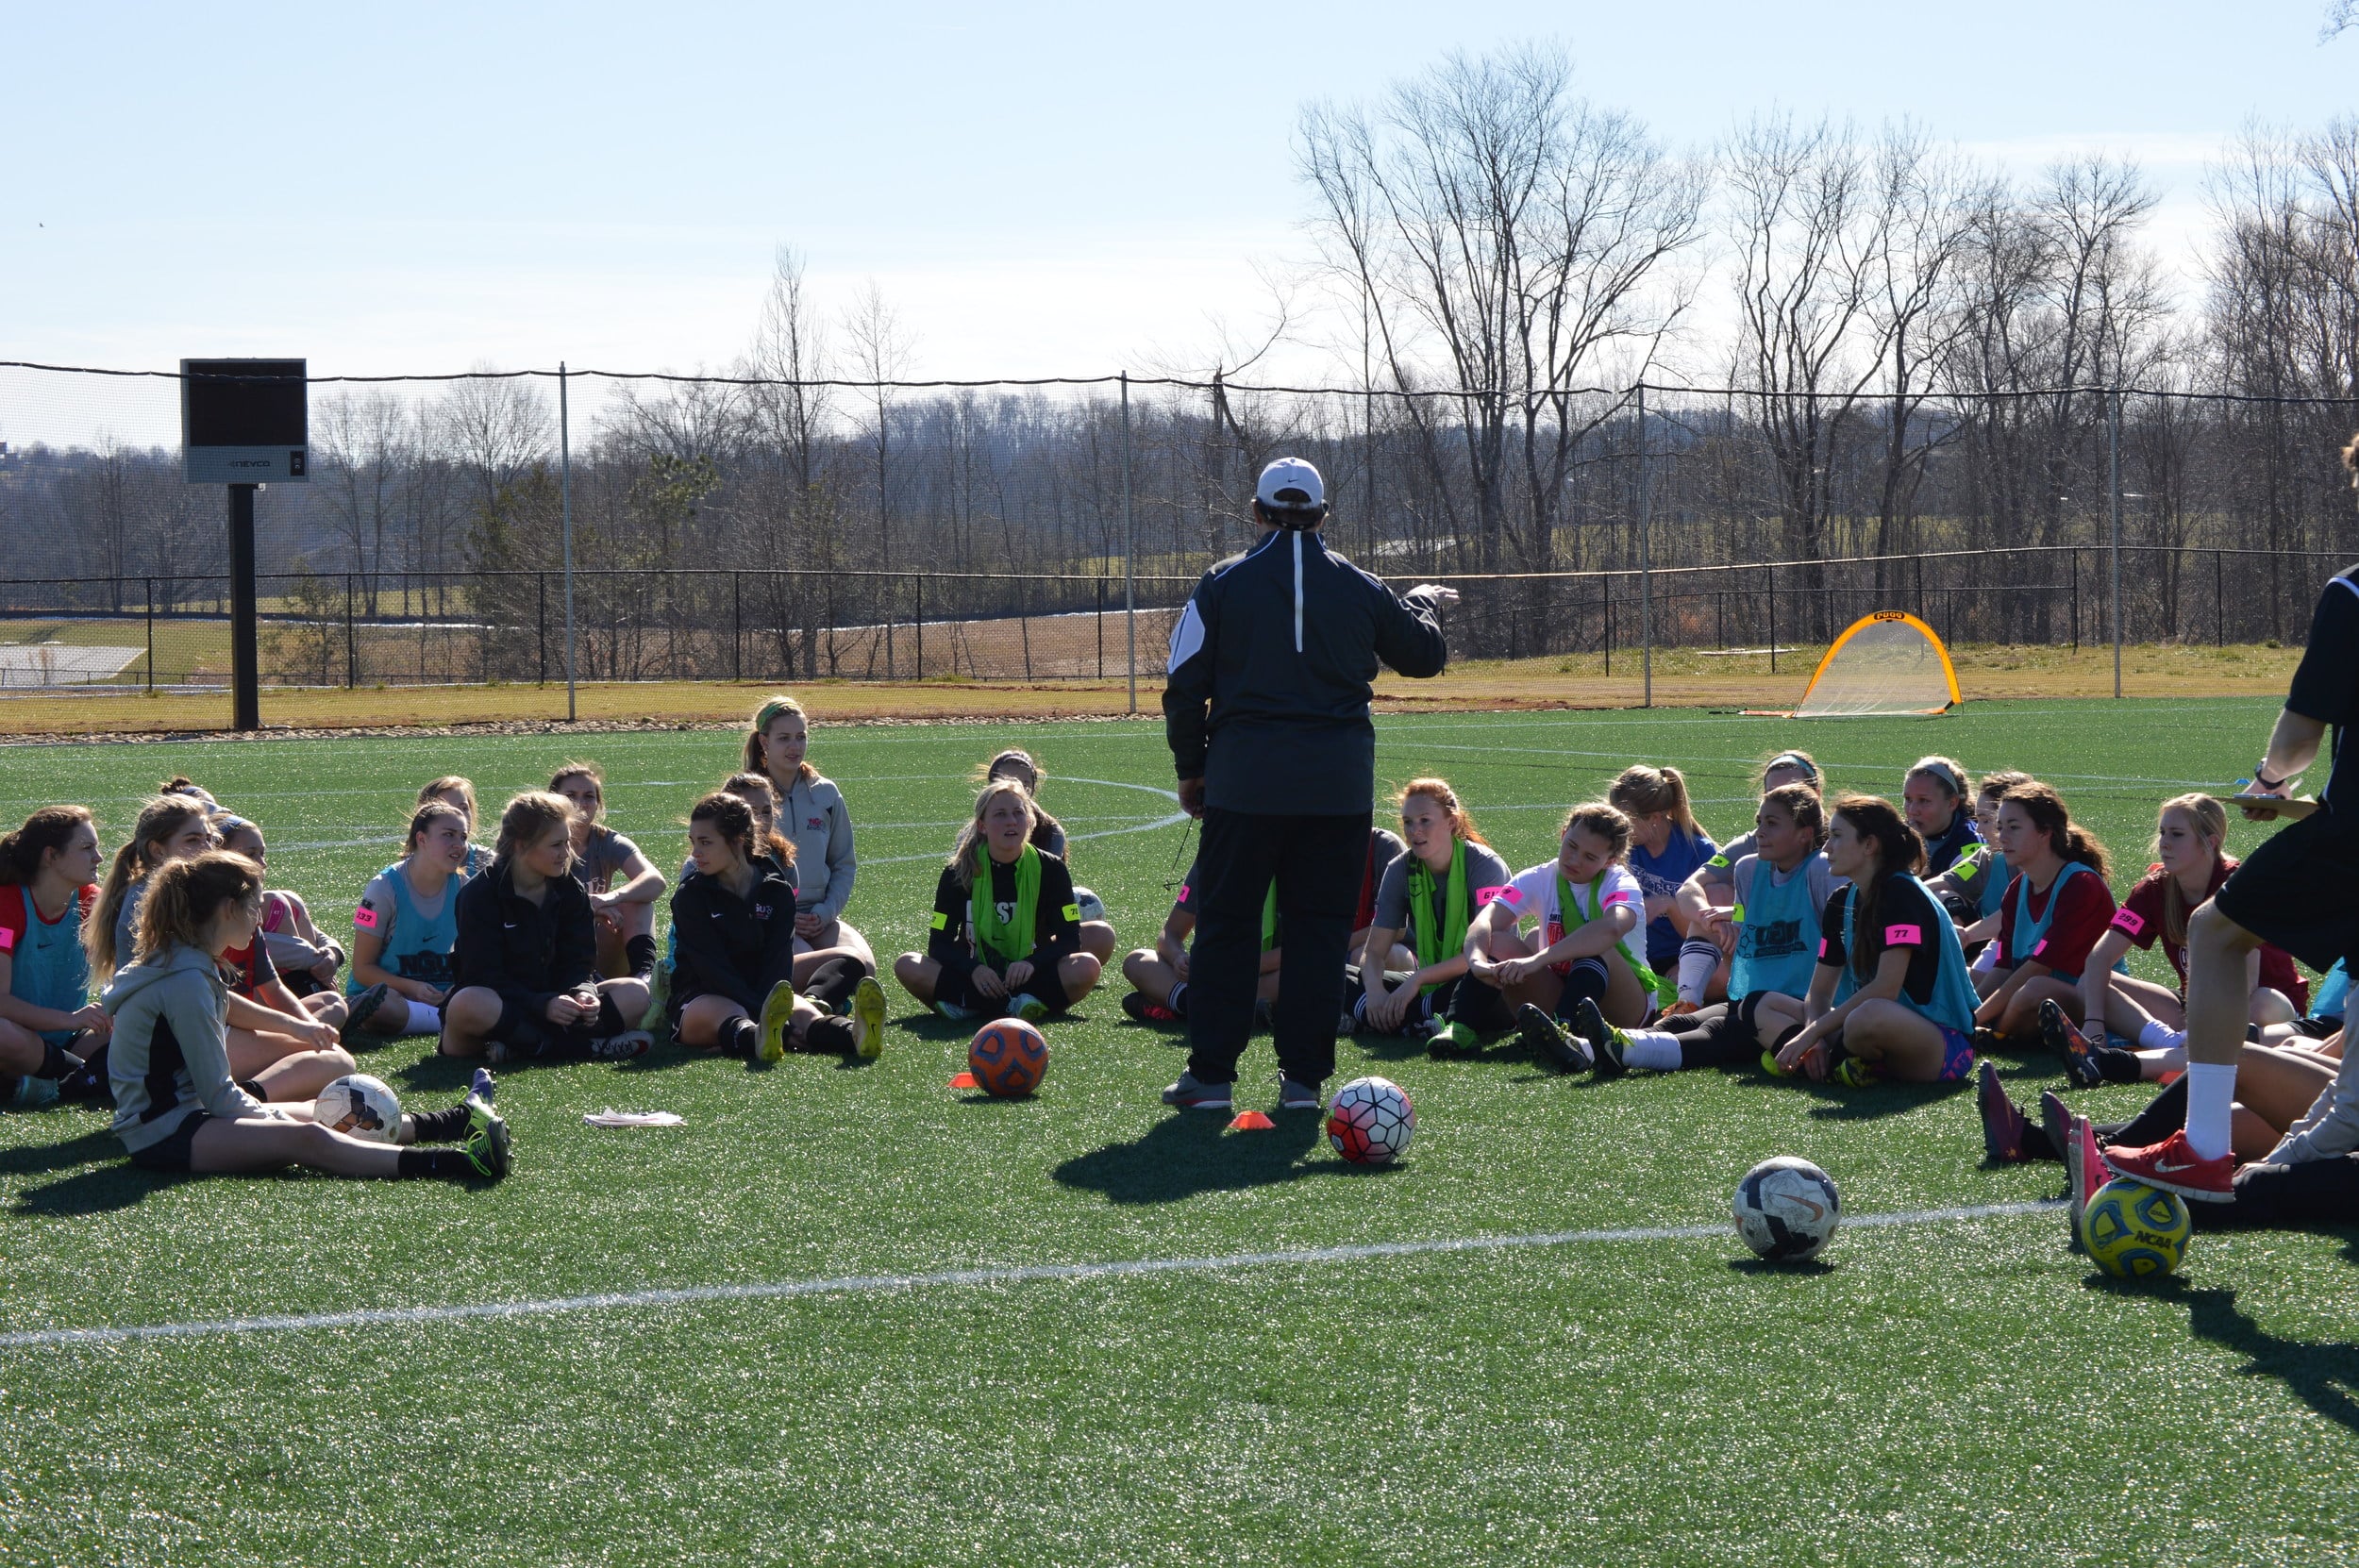 Head coach for the NGU women's soccer team, Andy Robinson, gave students some insight on what they would be doing during the camp on Saturday.